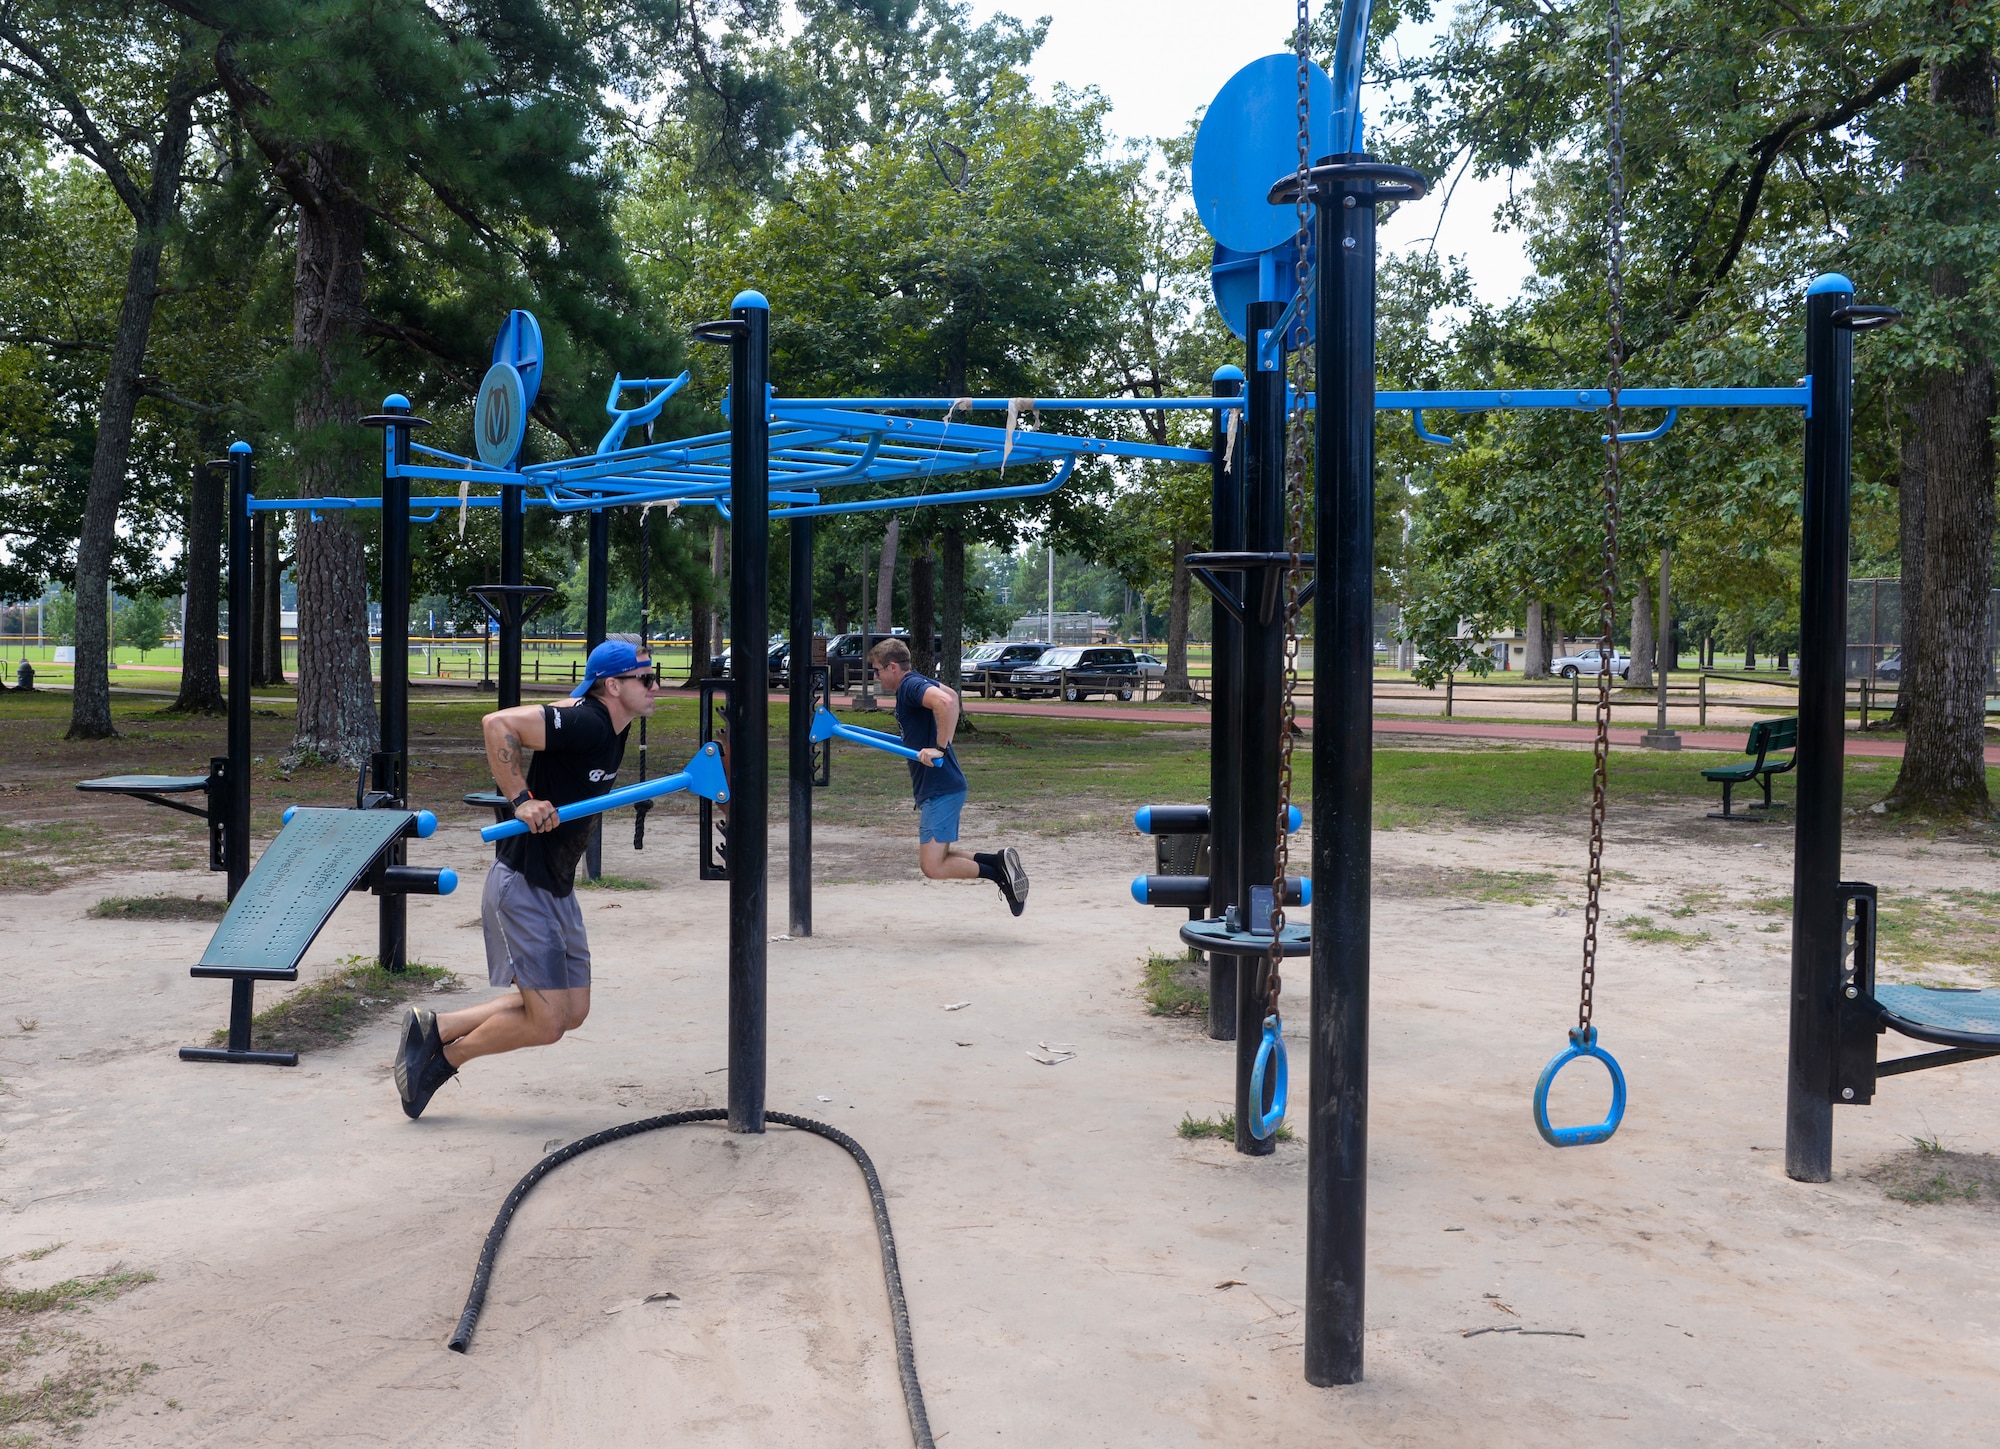 Second Lt. Danny Highland and 2nd Lt. Maxwell Heefner, both 41st Flying Training Squadron student pilots, conduct body dips at Freedom Park on August 8, 2020, at Columbus Air Force Base, Miss. Although the Columbus Air Force Base gym may be open, it is only available to active duty members while the base is operating under HPCON Charlie. (U.S. Air Force photo by Airman 1st Class Davis Donaldson)